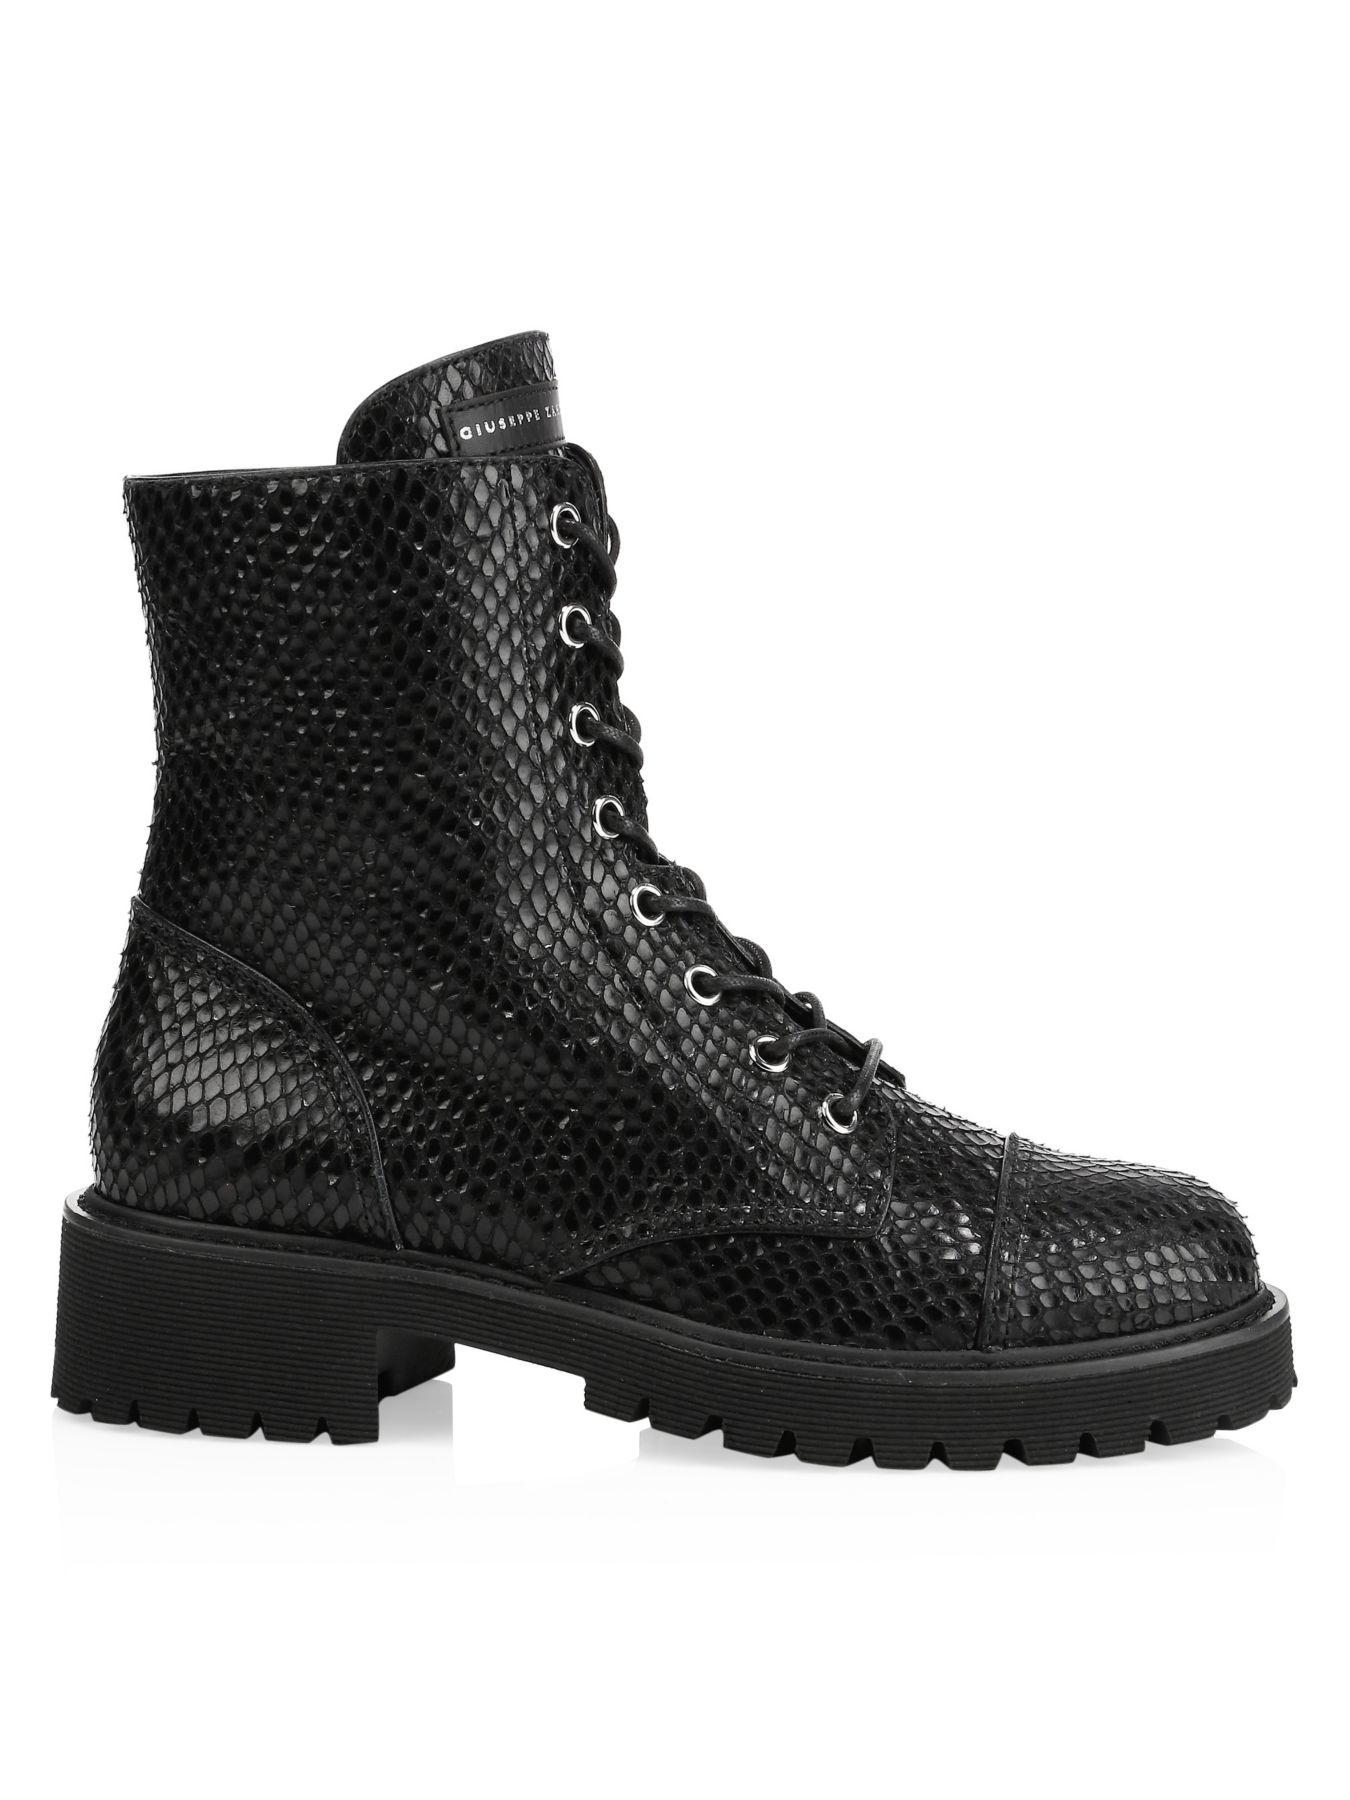 Giuseppe Zanotti Snake-embossed Leather Combat Boots in Black - Lyst